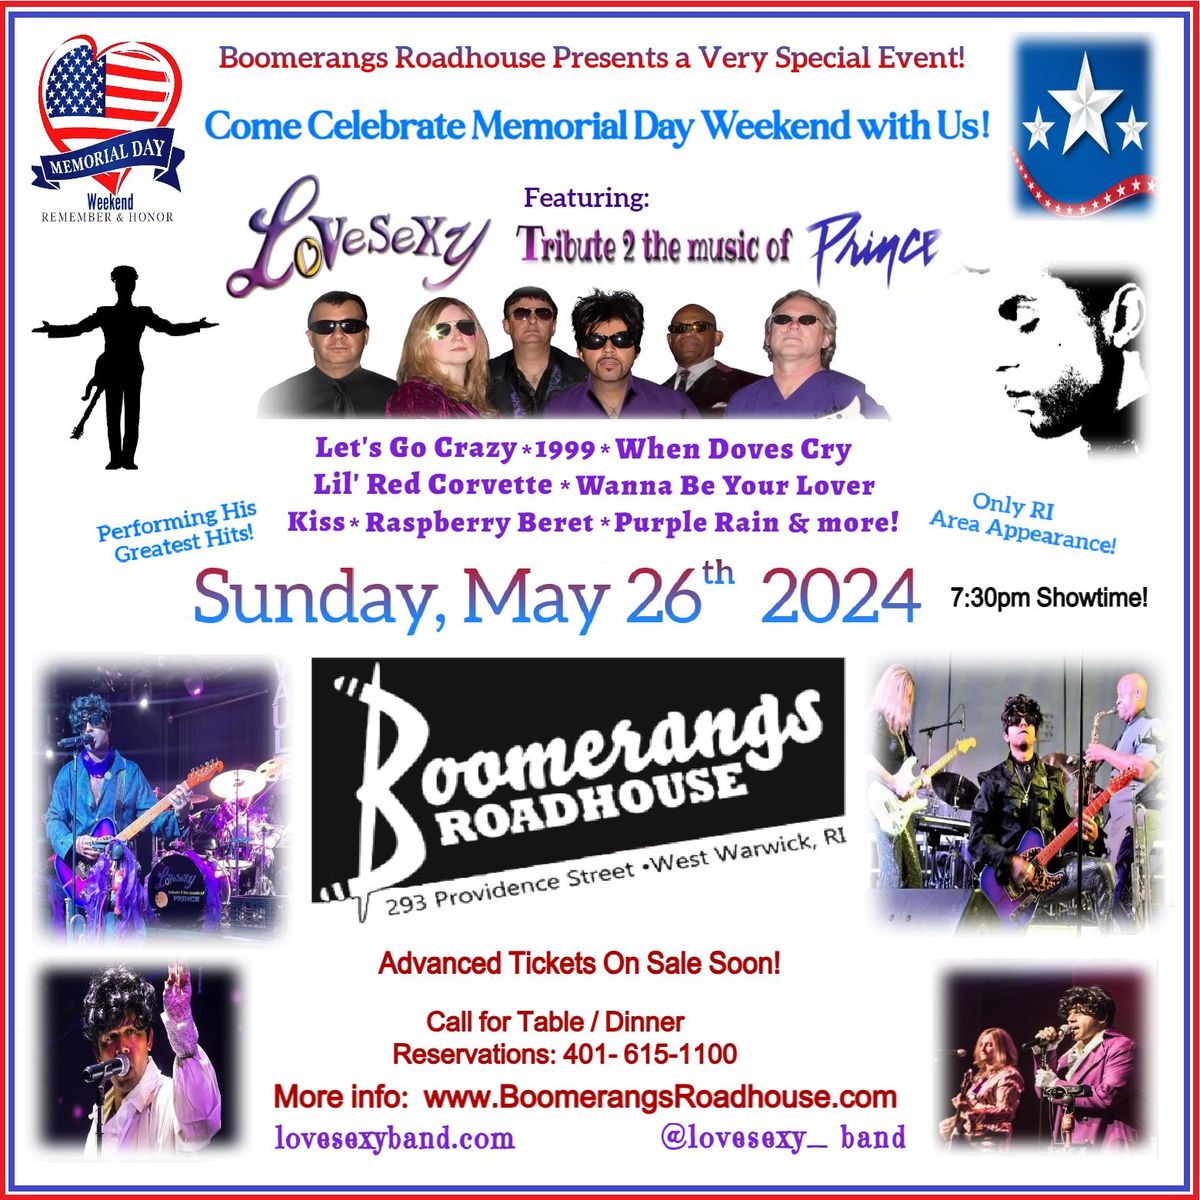 Lovesexy Prince Tribute Sunday Memorial Day Weekend!